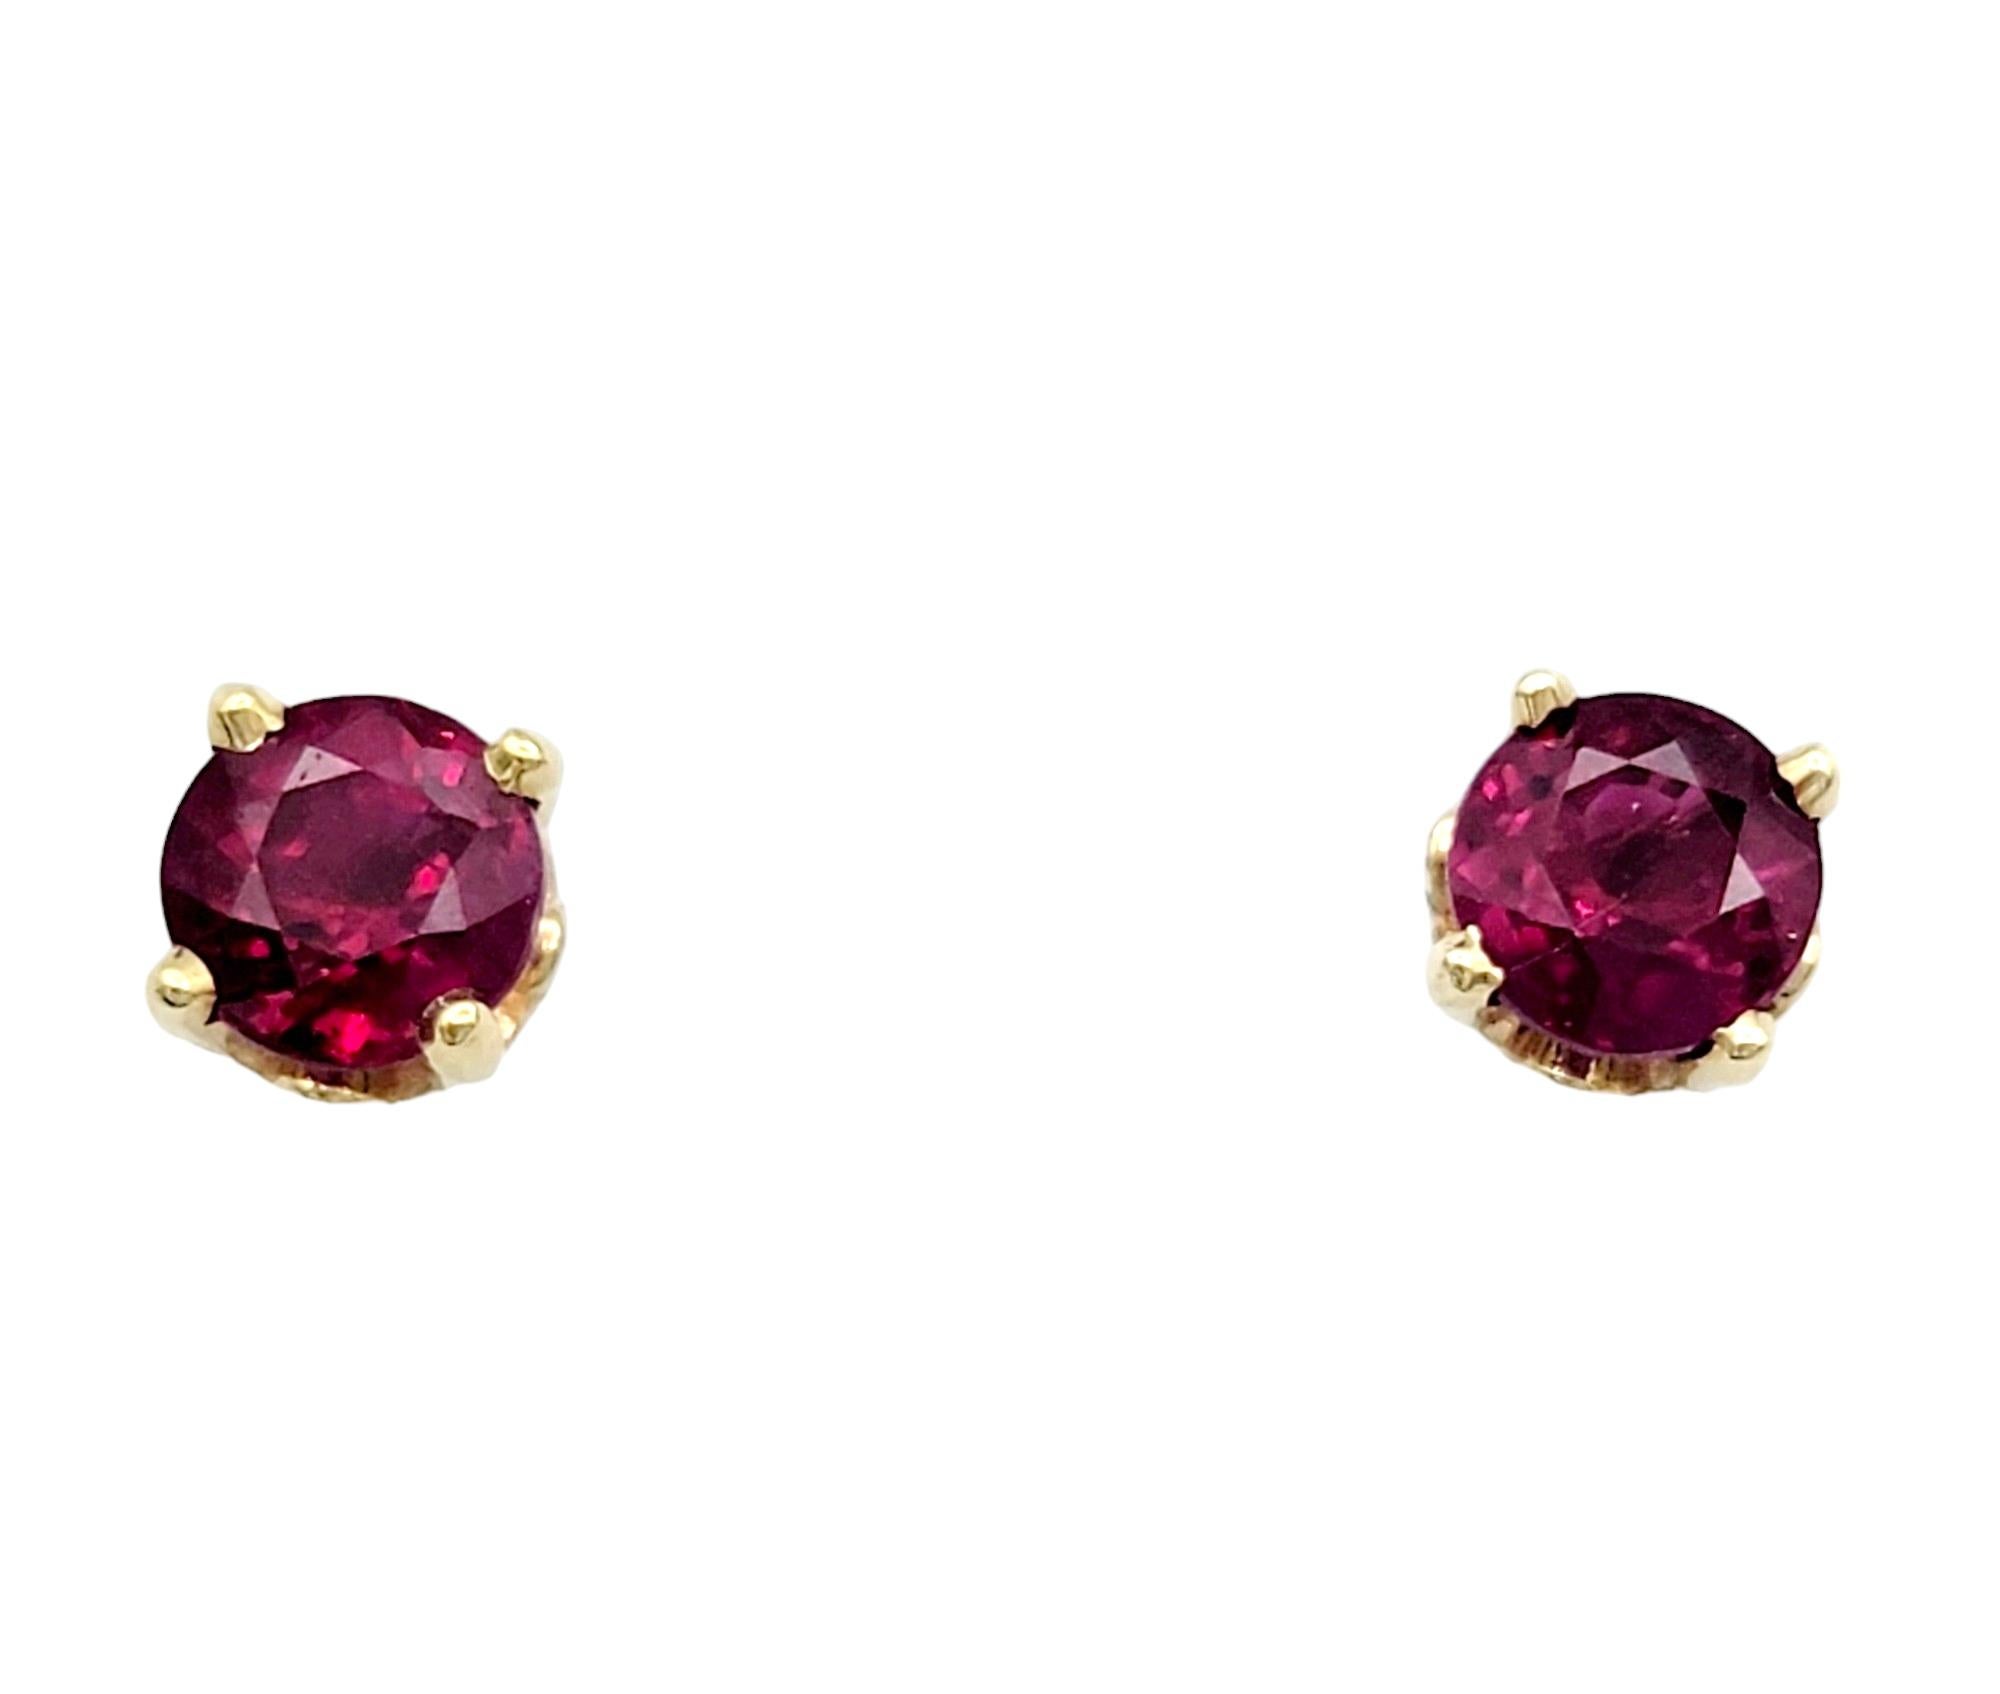 These captivating earrings, set in warm 14 karat yellow gold, feature lab-created red ruby stud earrings as their centerpiece. The ruby studs add a rich and vibrant pop of color, symbolizing passion and elegance. To enhance their allure, a jacket 